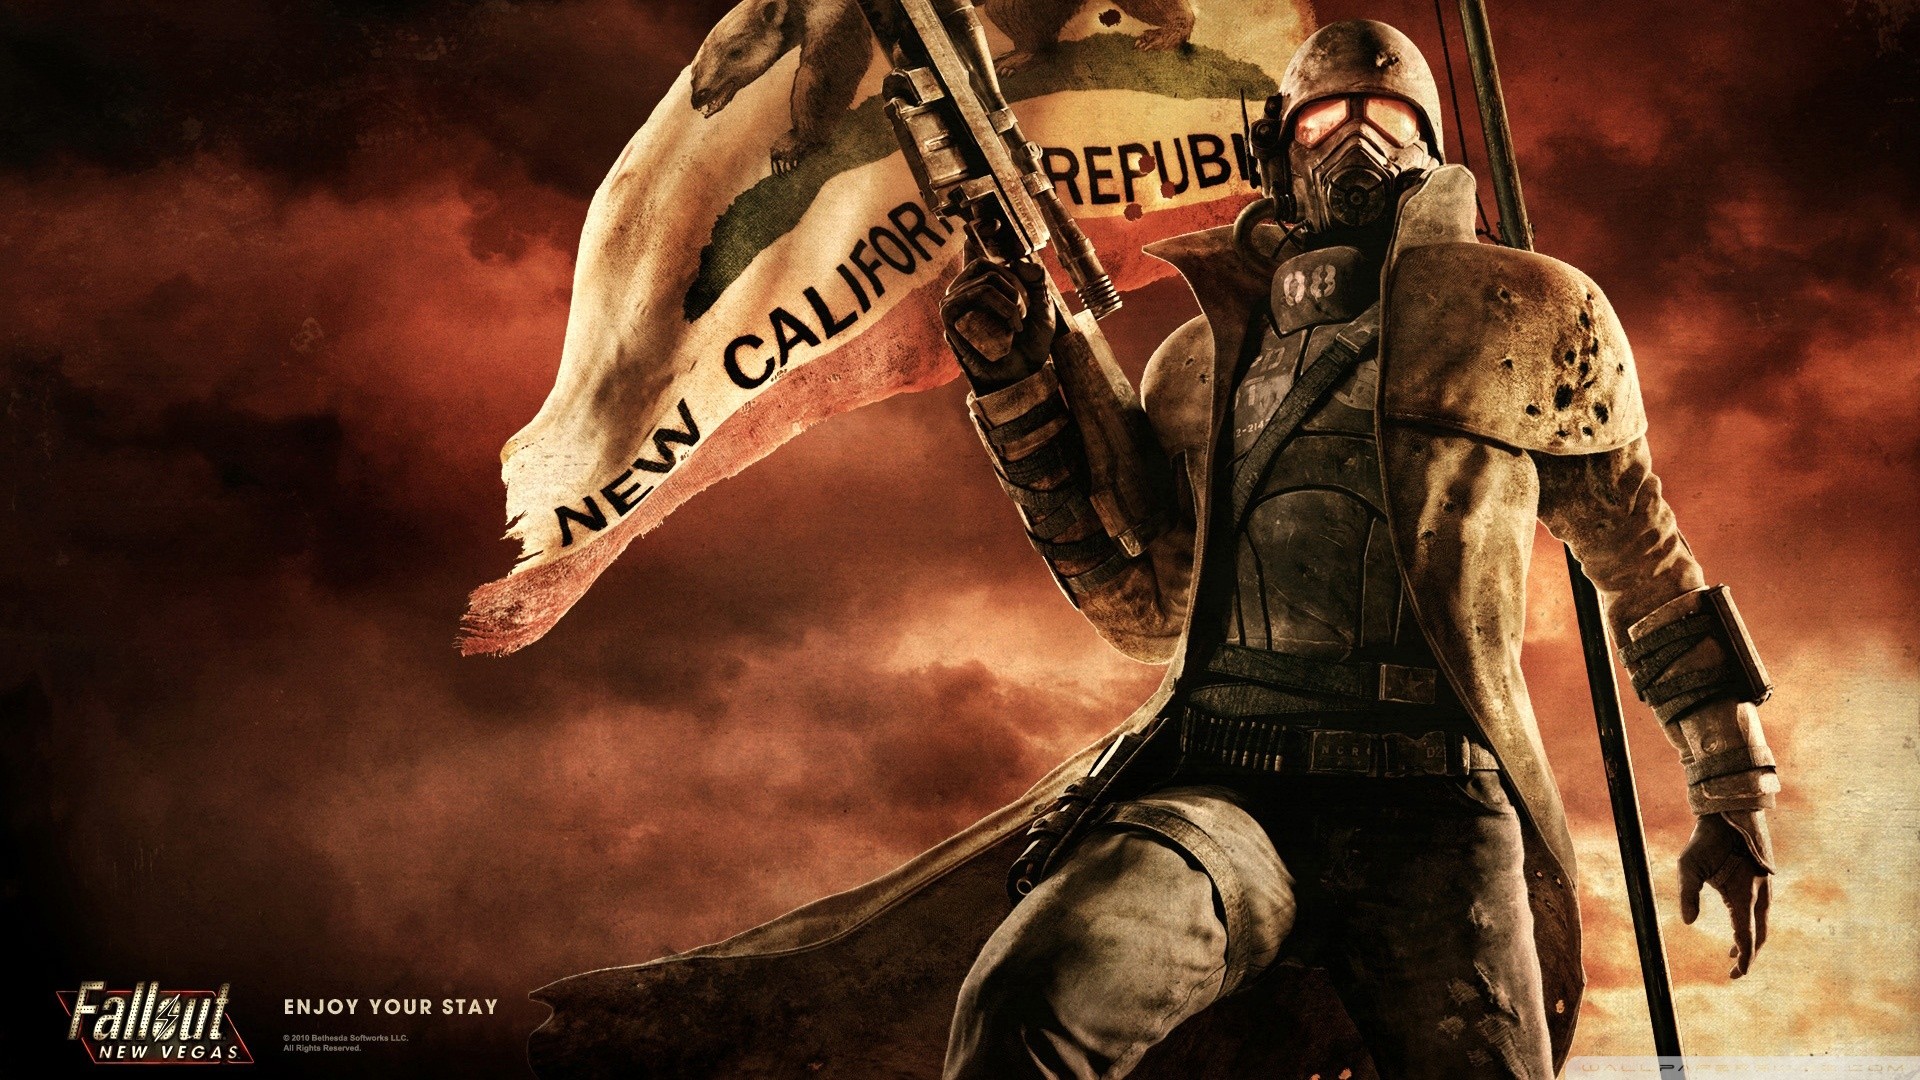 1920x1080 Fallout New Vegas HD Wallpapers Backgrounds Wallpaper | HD Wallpapers |  Pinterest | Fallout, Wallpaper and Wallpaper backgrounds